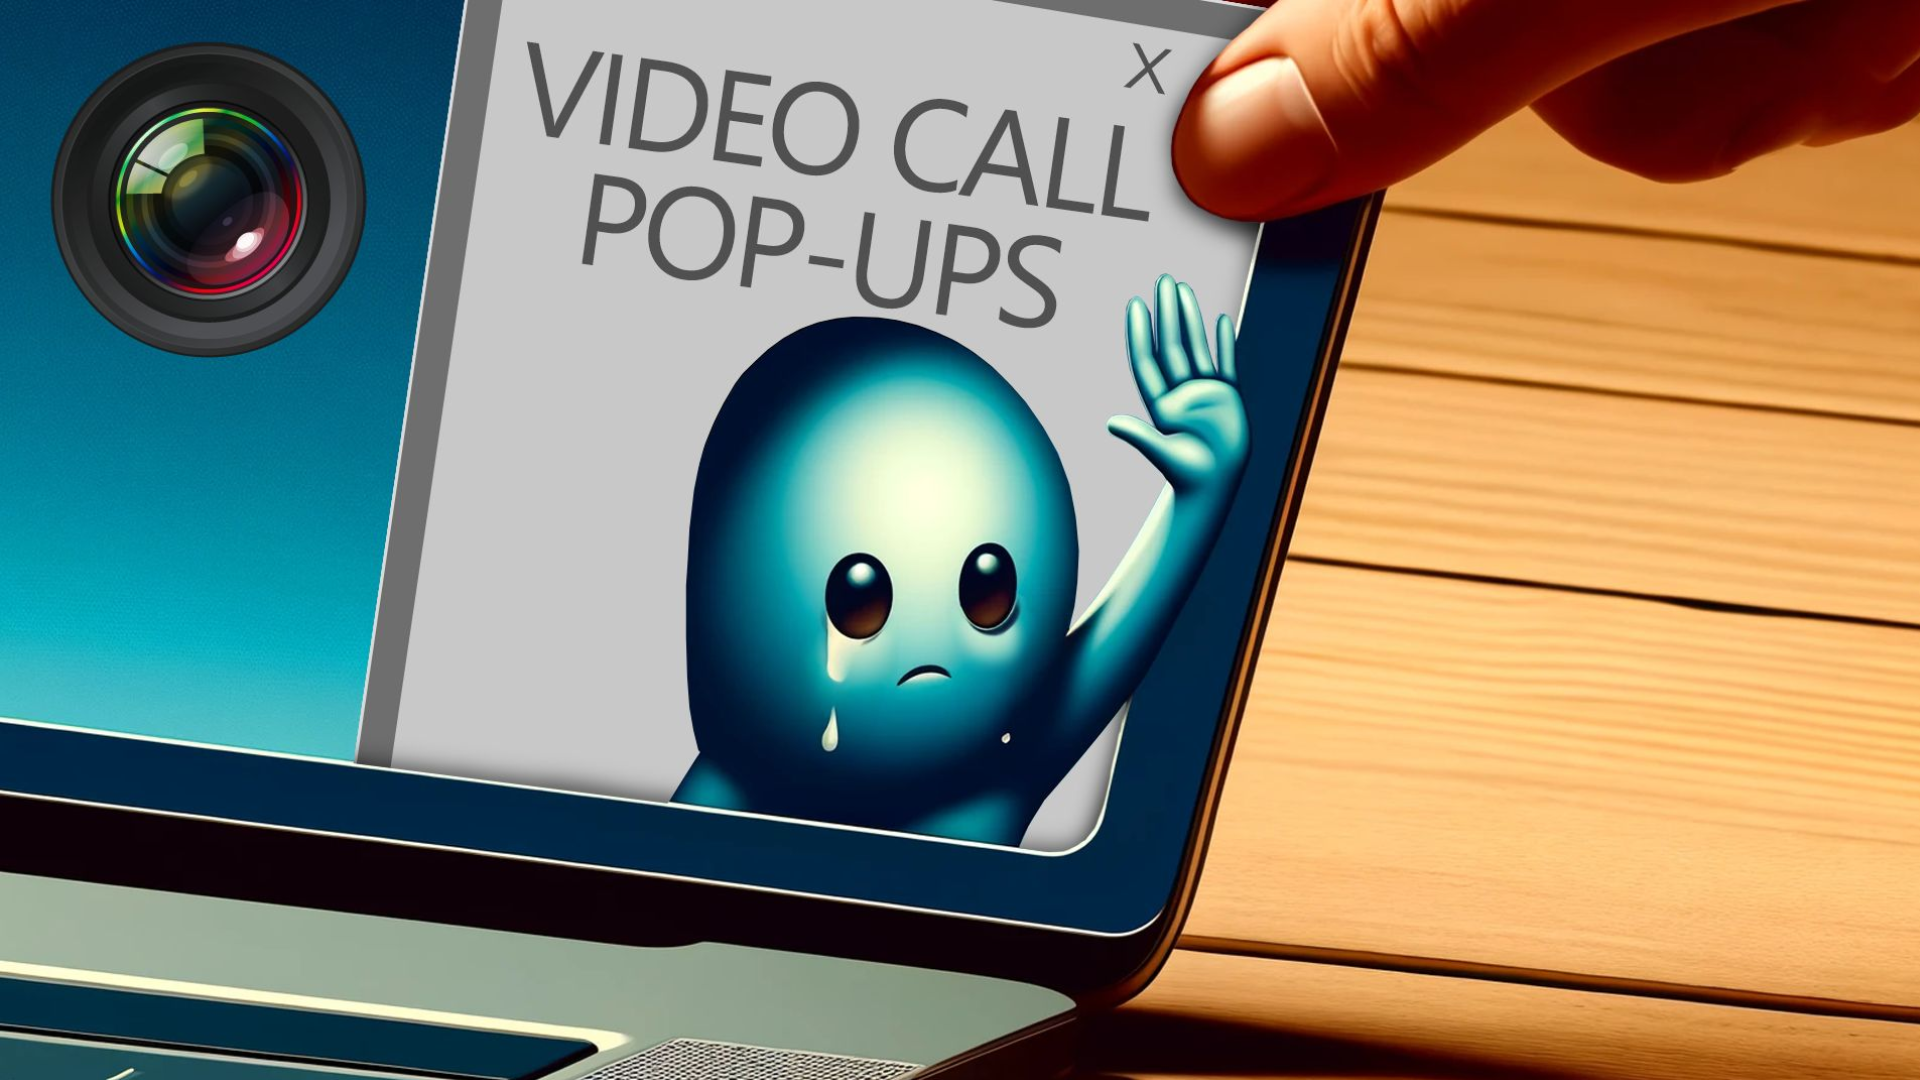 video call pop ups on a laptop with sad character waving